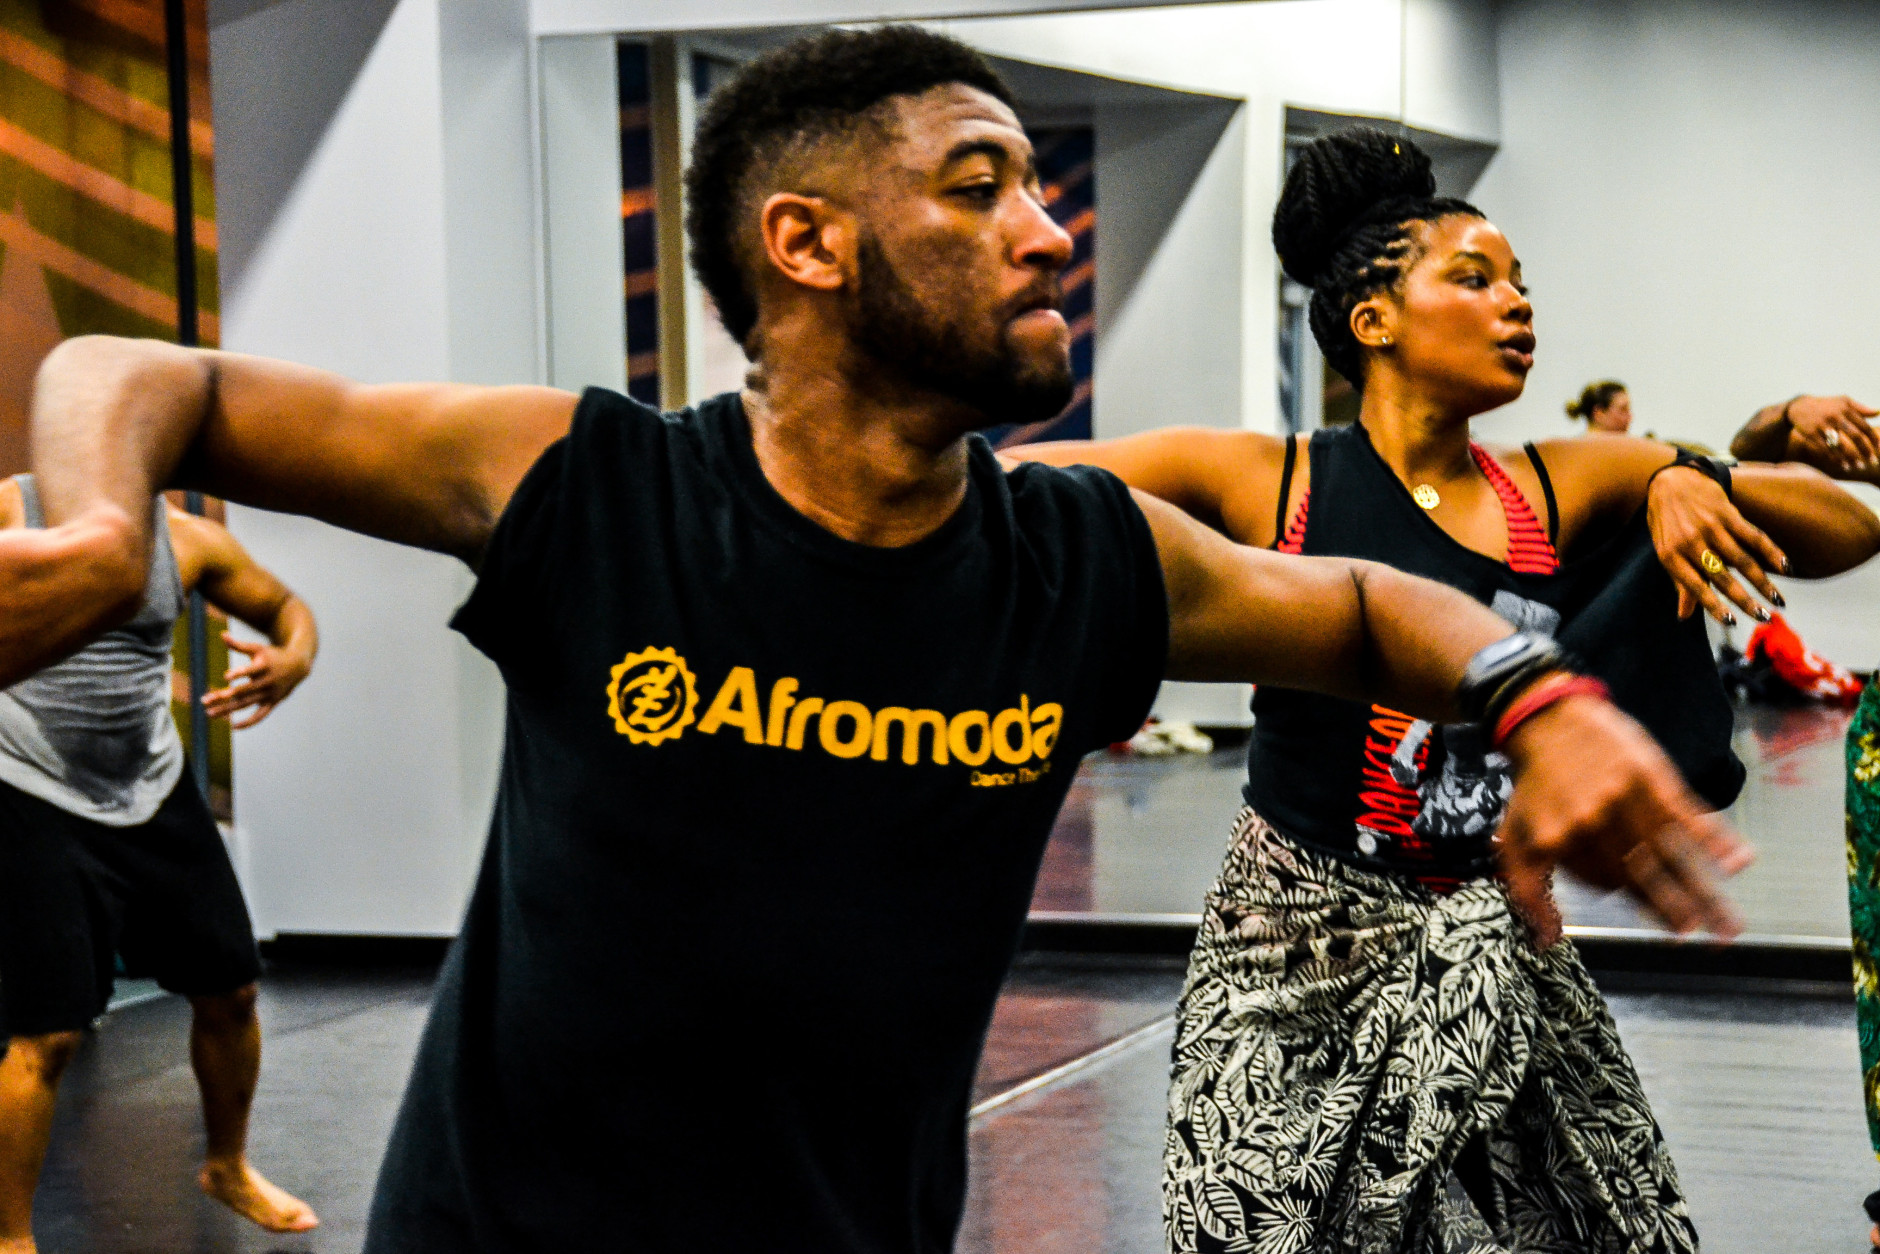 Afromoda Dance Theater offers Wednesday night classes at Joy of Motion Dance Center in Washington, D.C. (Photo by Christopher Bulbulia)